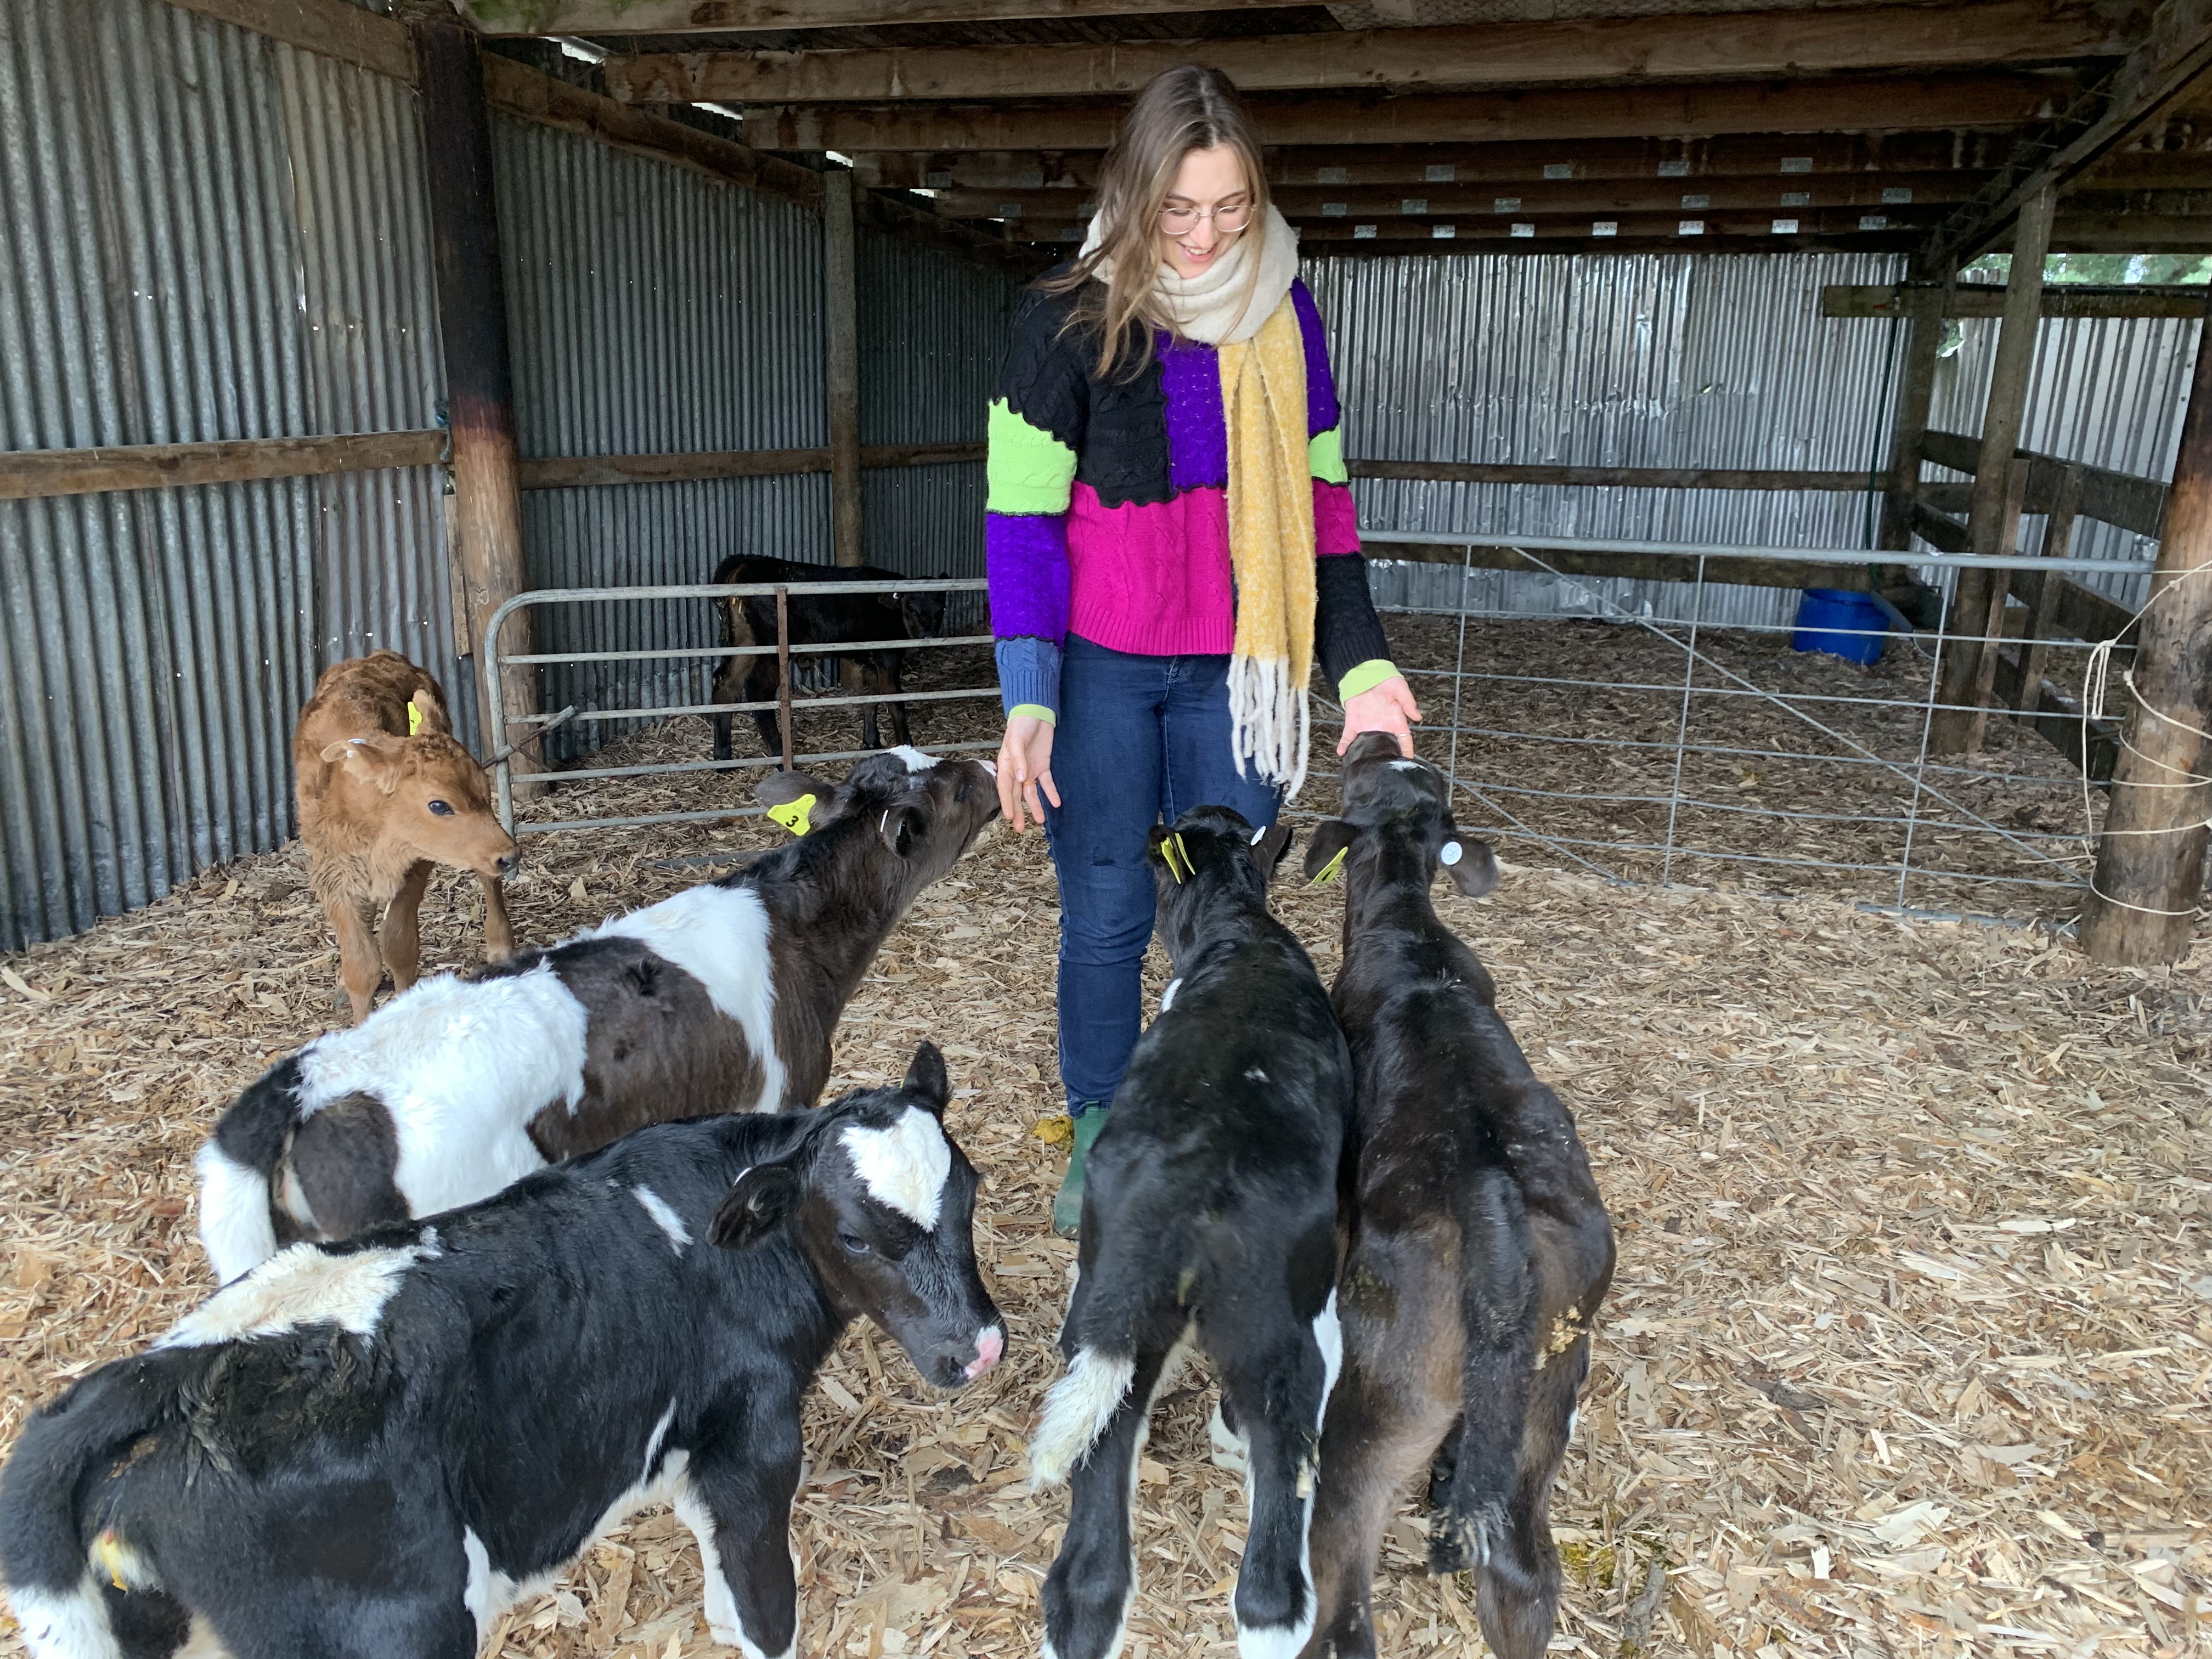 Milena Bojovic wearing a jumper and scarf, surrounded by calves on a fieldwork trip to Aotearoa New Zealand